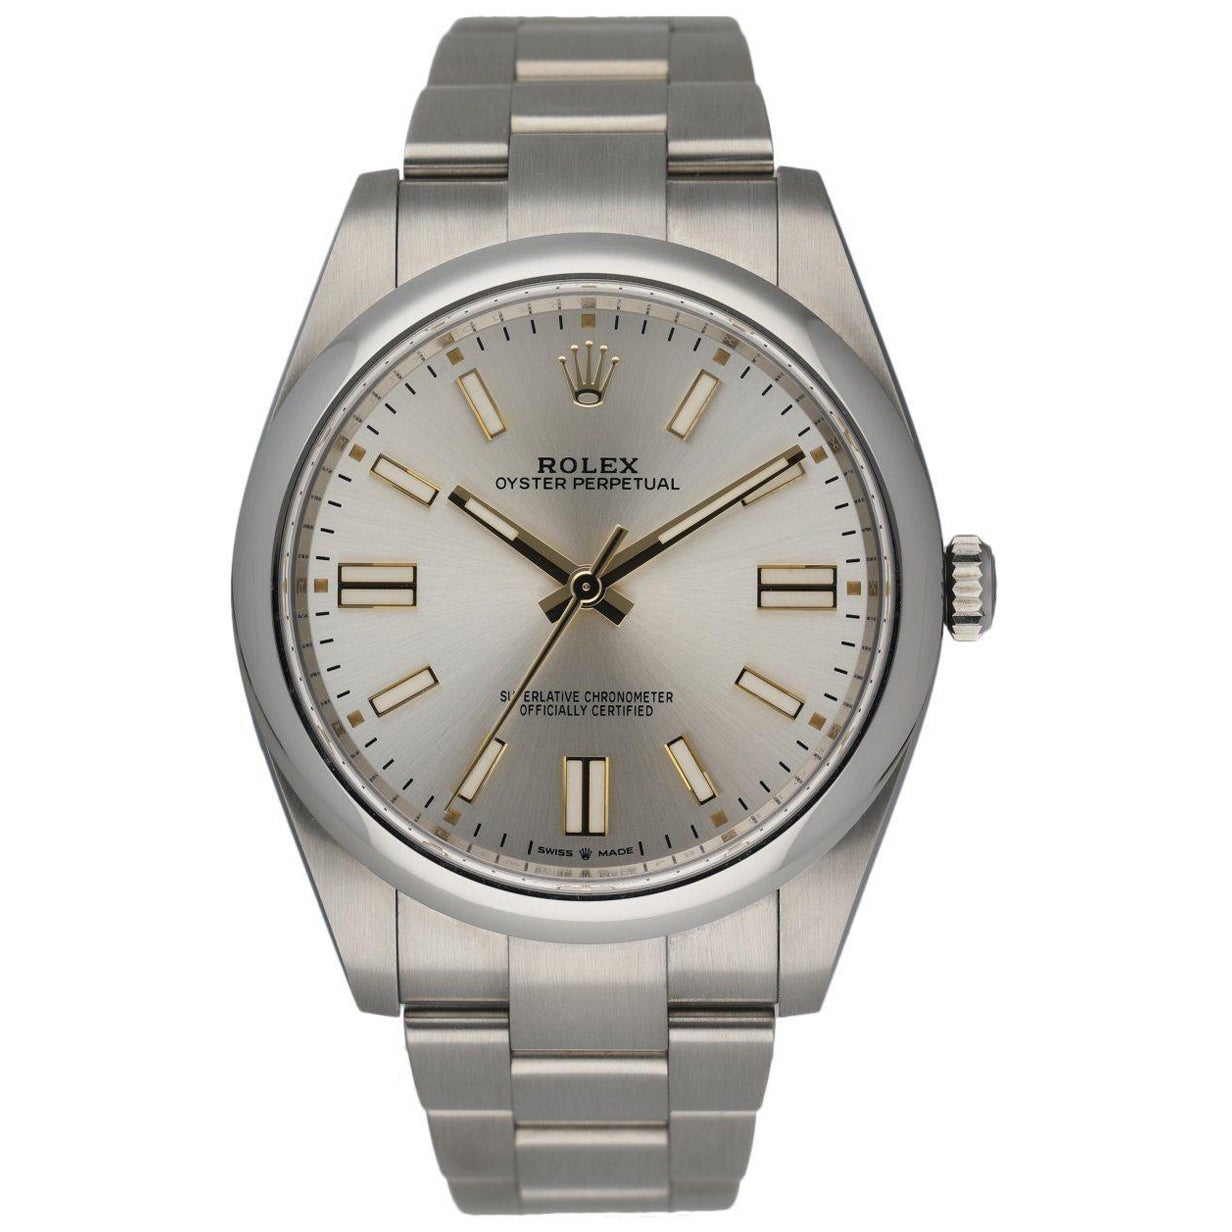 Rolex Oyster Perpetual 124300 Stainless Steel Men's Watch Box & papers